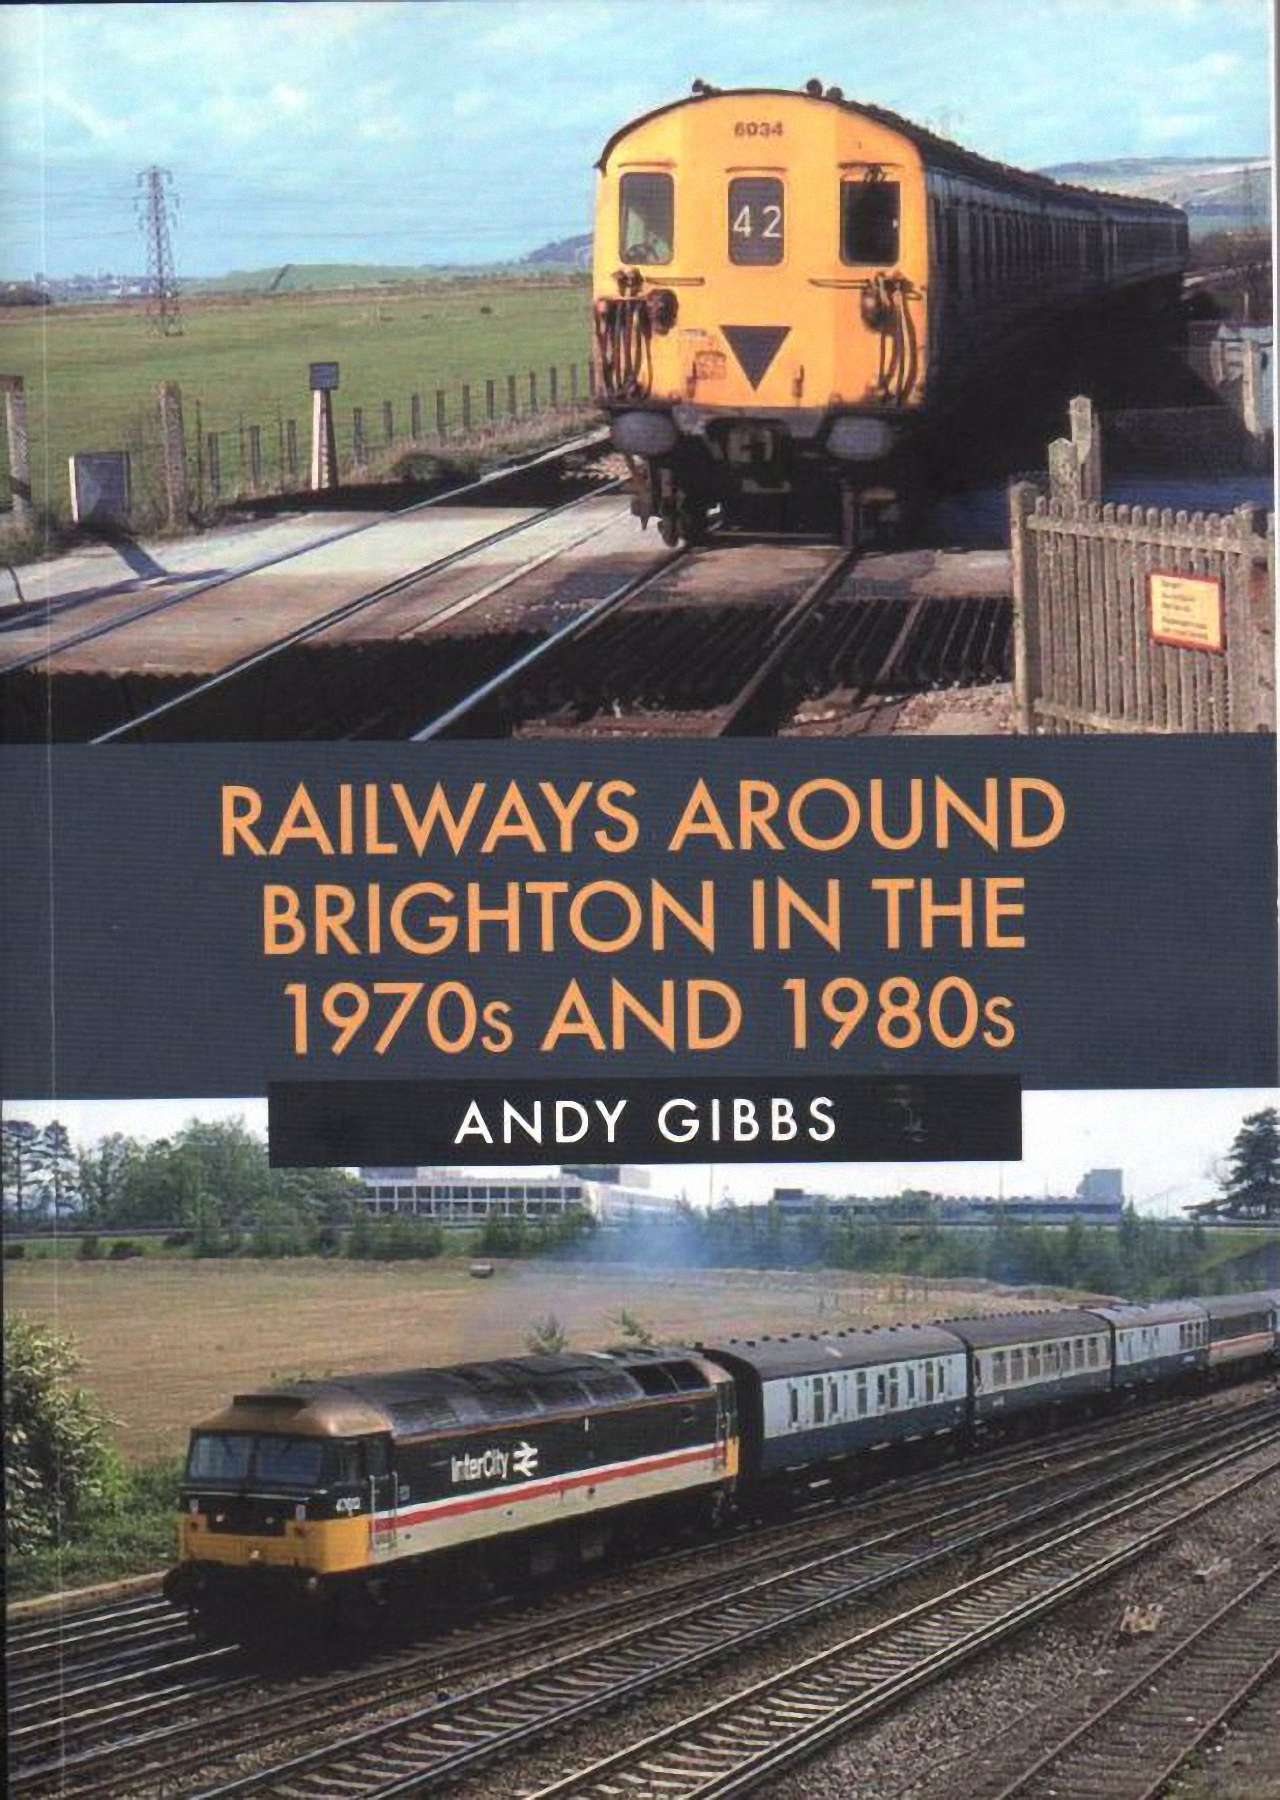 Book Review: Railways around Brighton in the 1970s and 1980s by Andy Gibbs